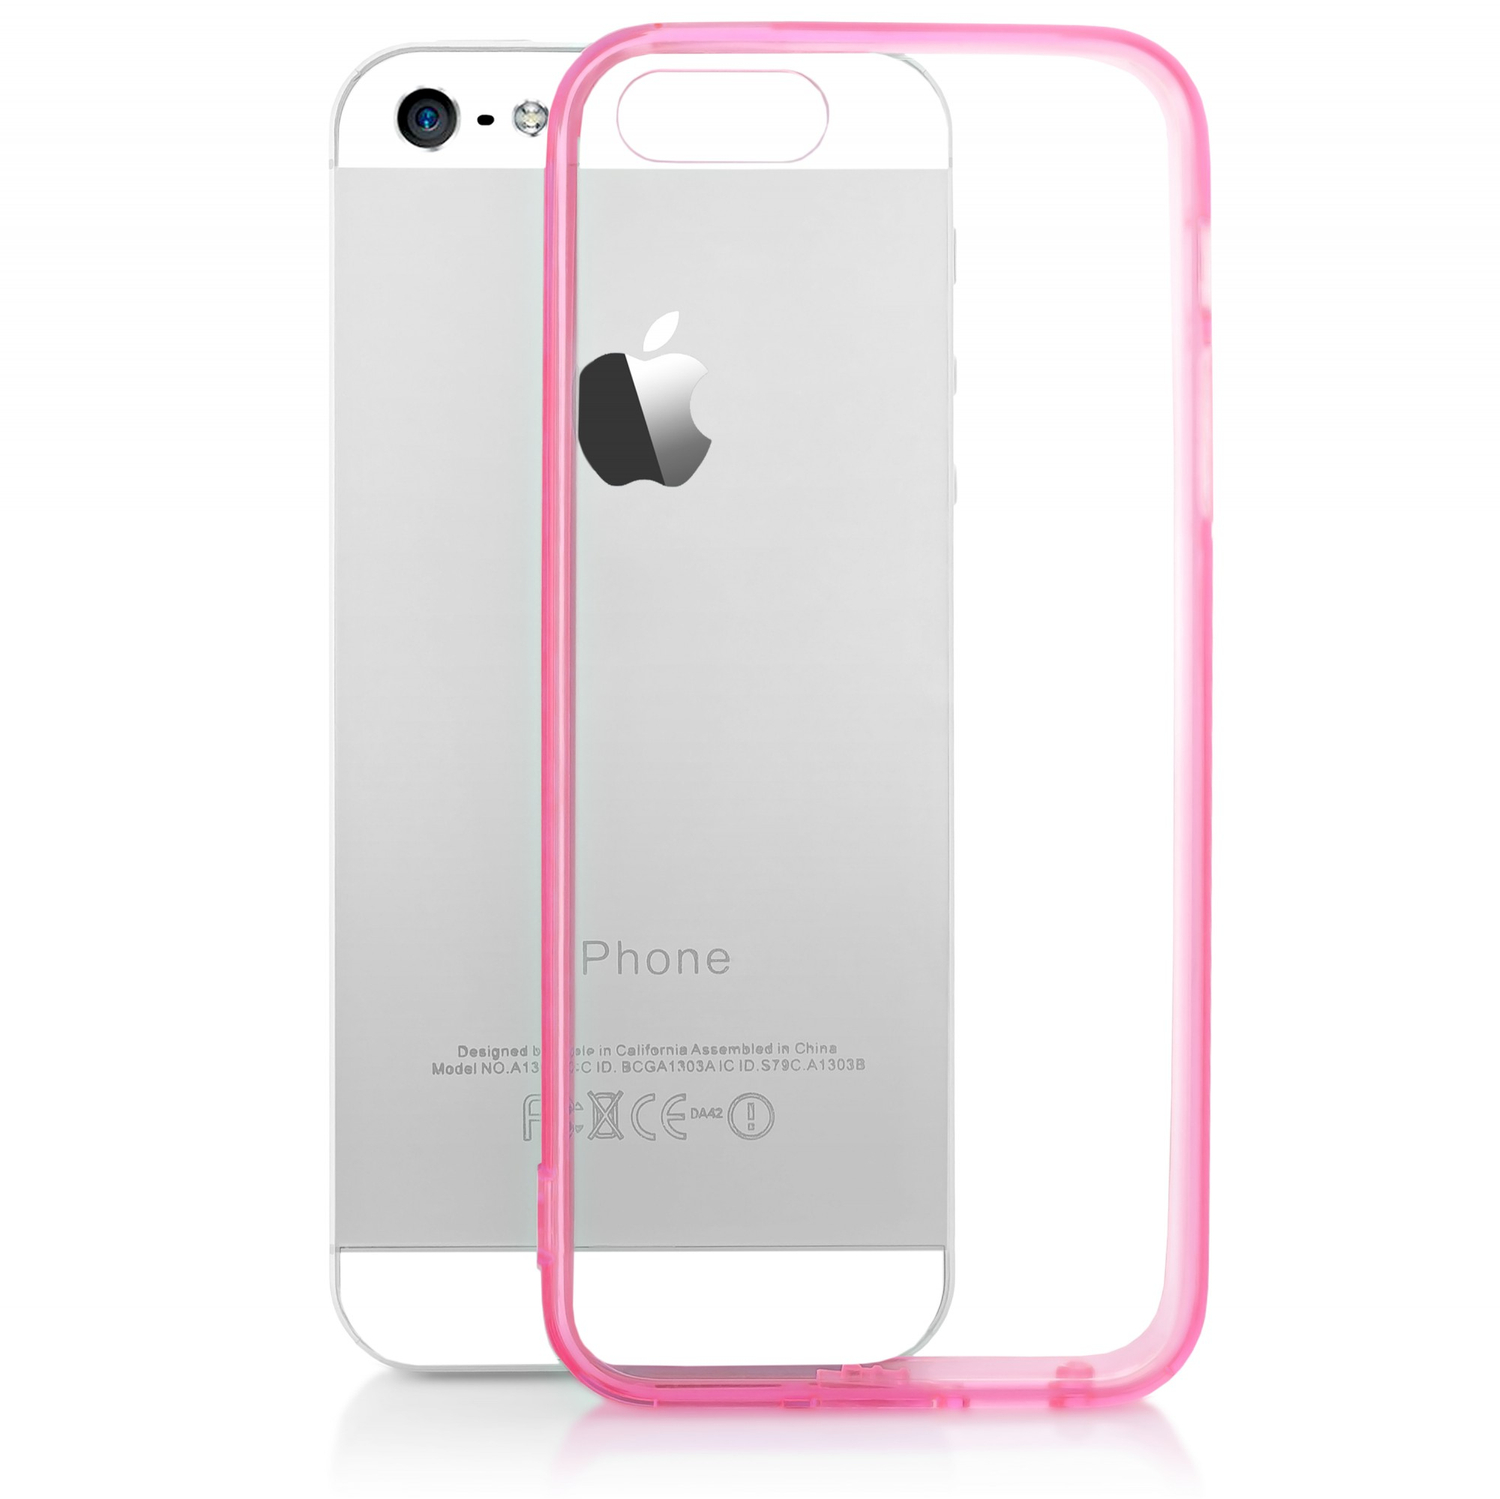 iPhone 5s, iPhone Apple, Backcover, (1. Pink Klare Generation) NALIA iPhone 5 SE Hülle,